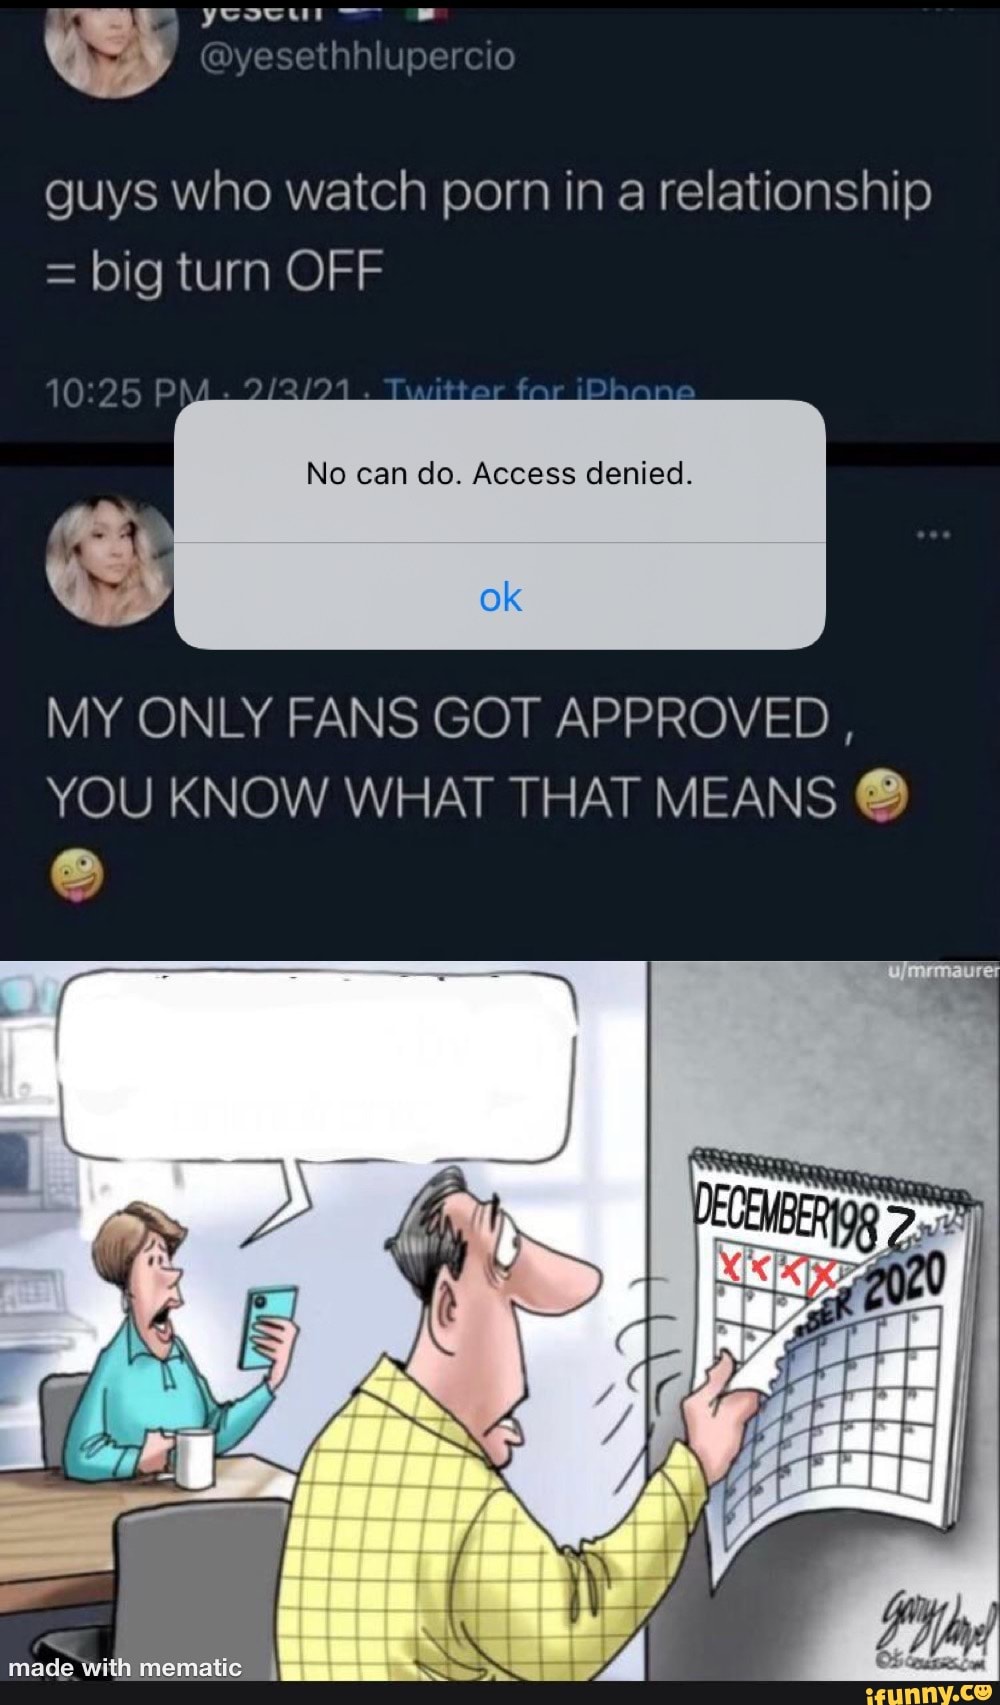 Fans only guys